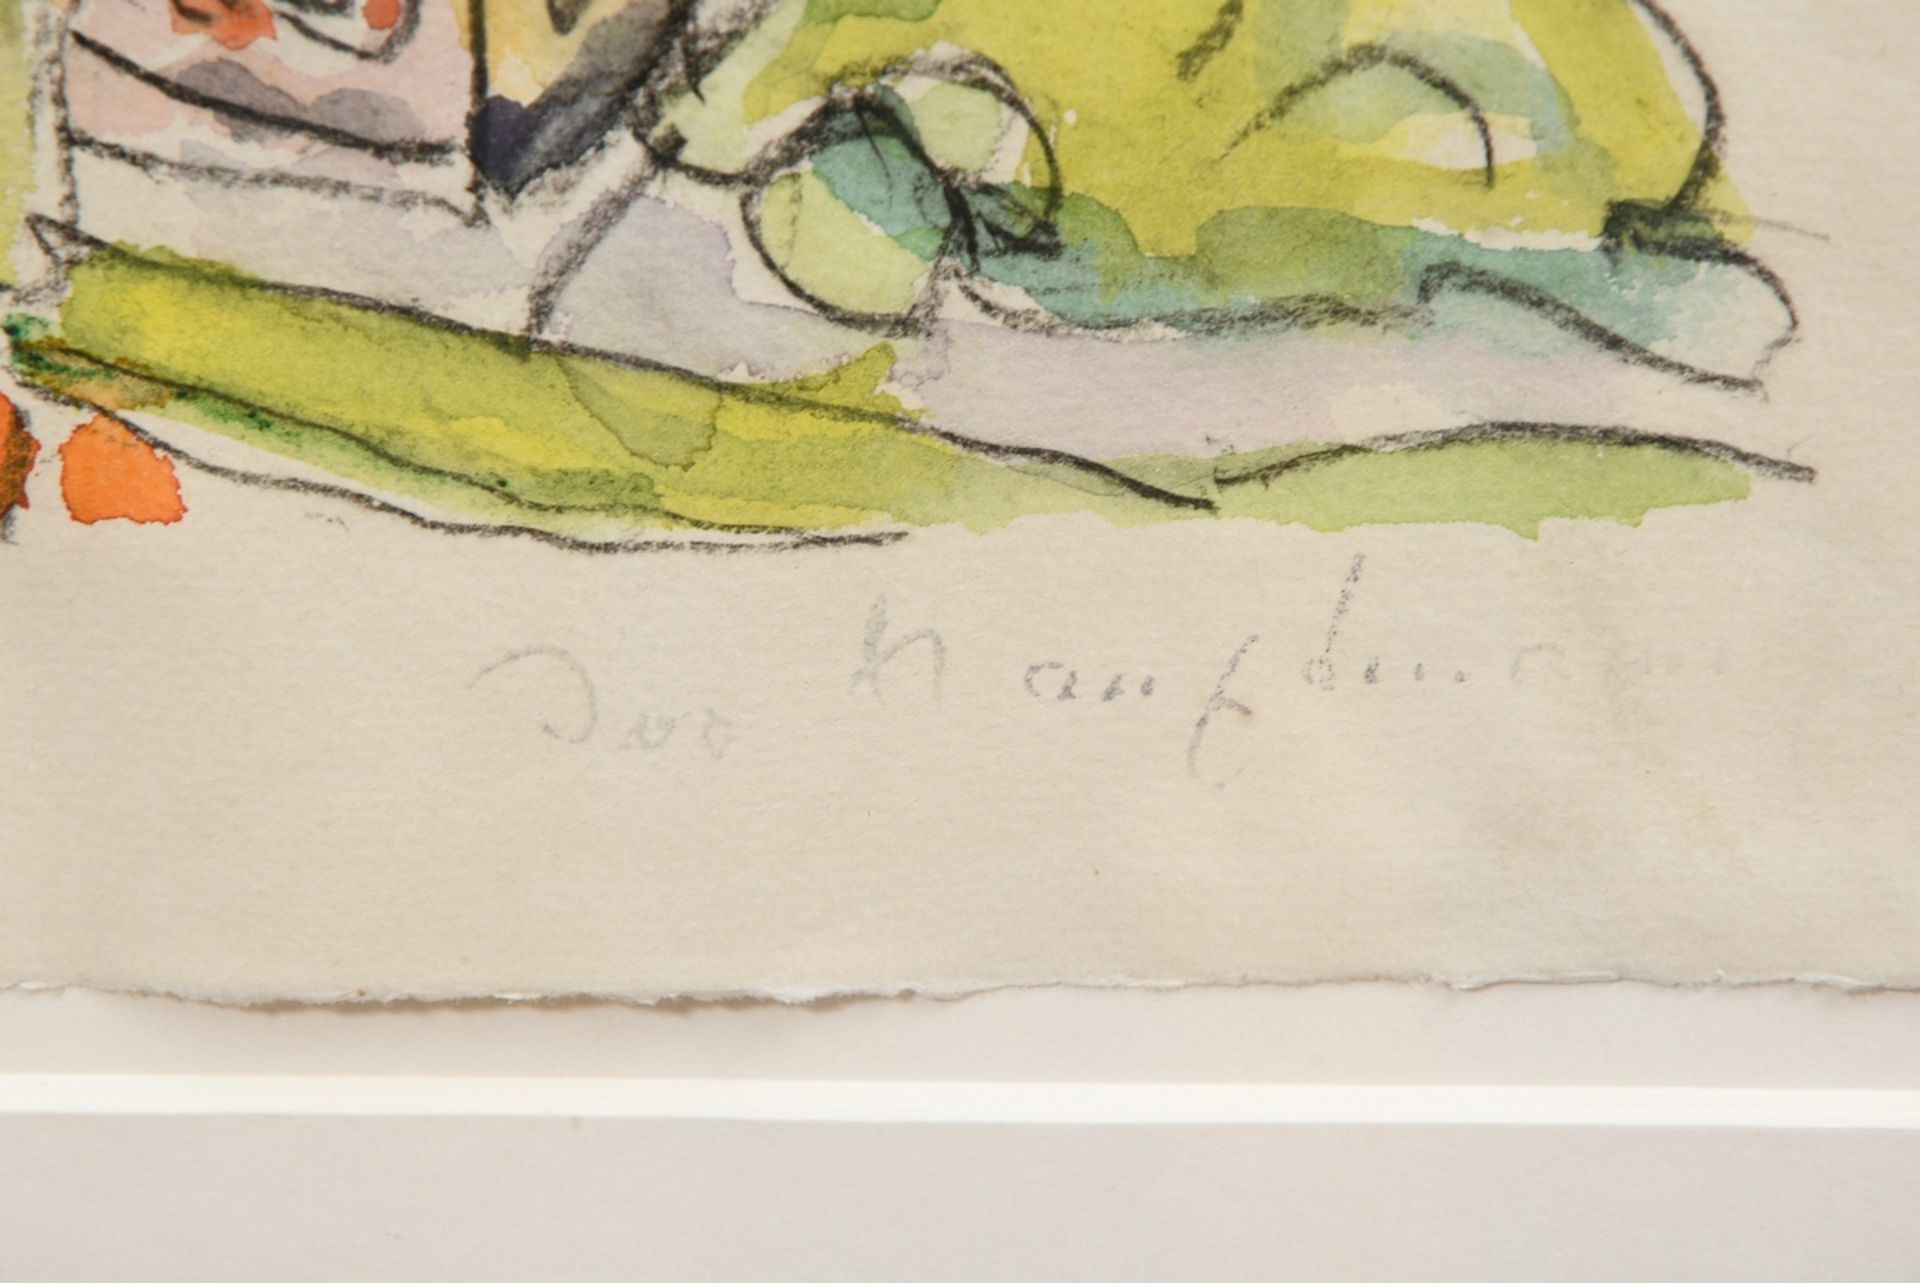 Hauptmann, Ivo (1886-1973) "Gardasee"(?), charcoal/watercolour, sign. lower right, SM 38,2x46,4cm ( - Image 3 of 3